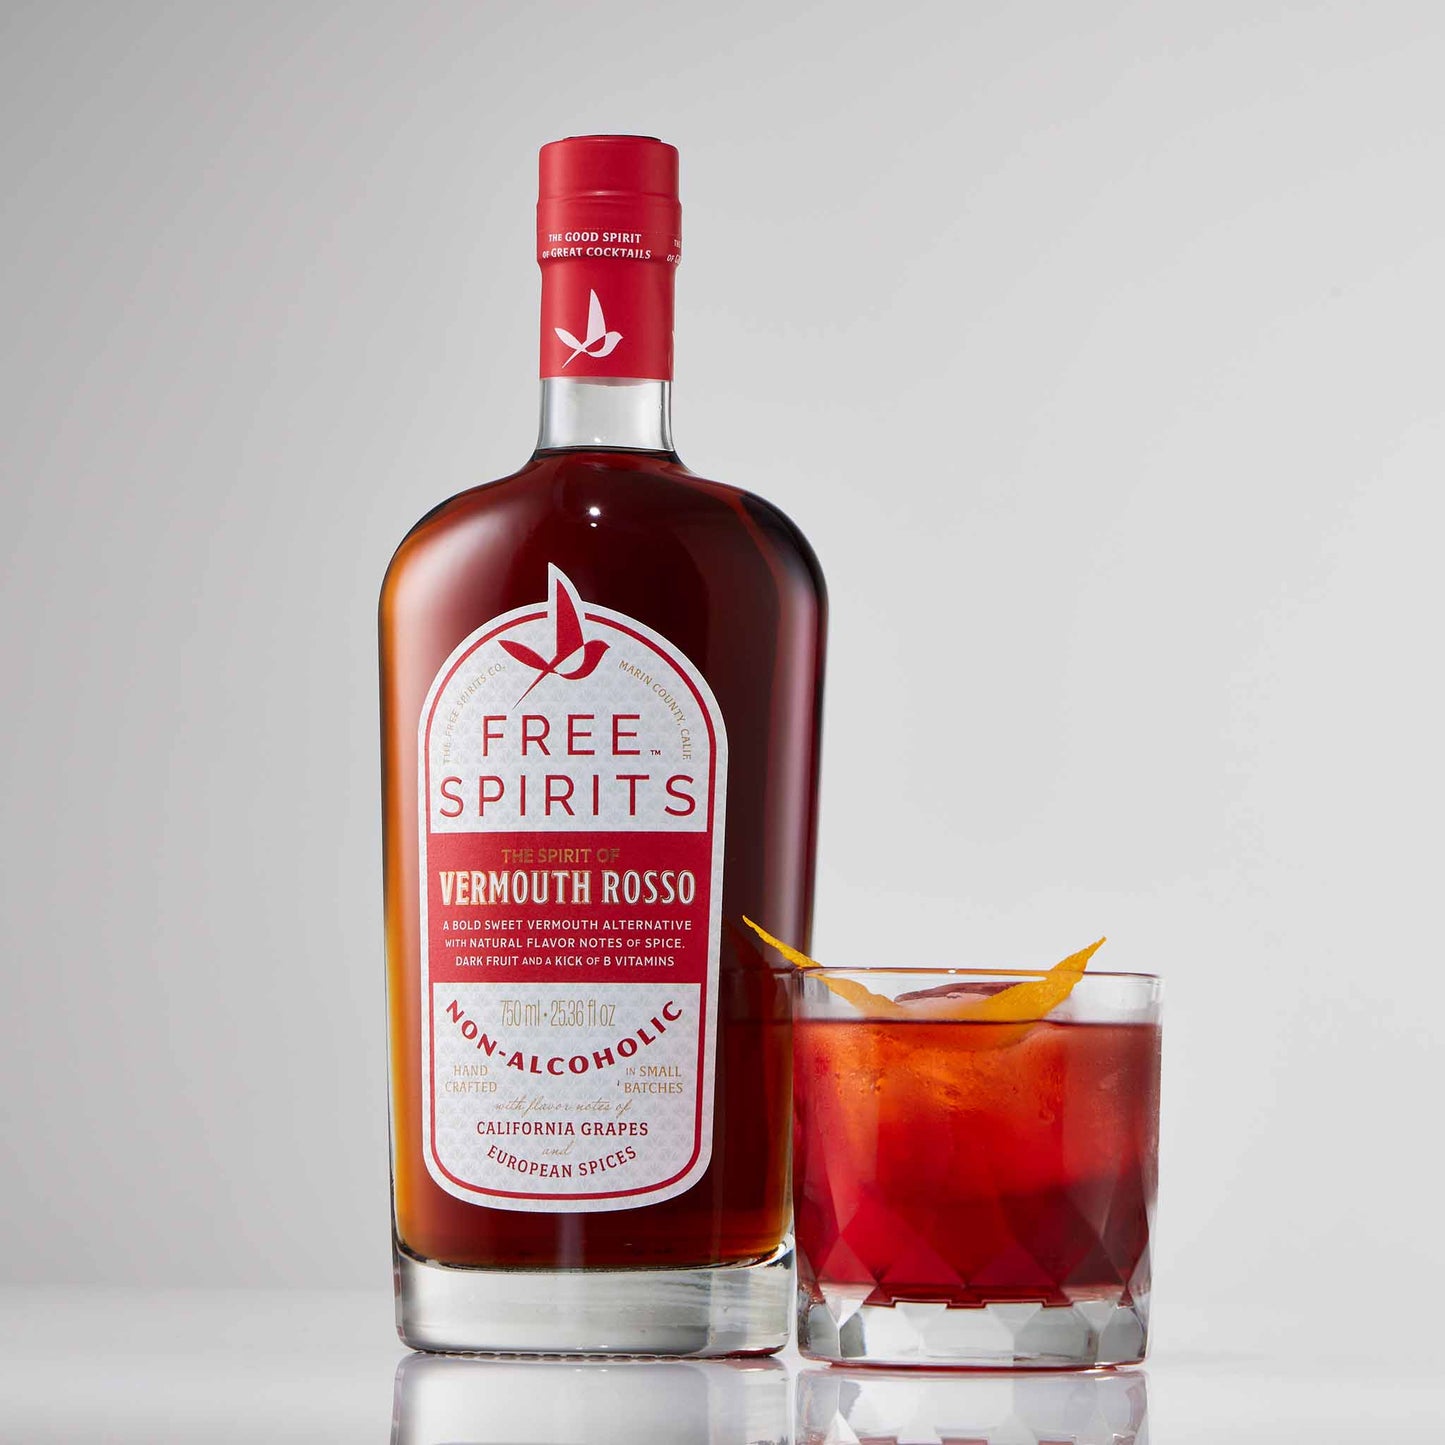 The Free Spirits Company - The Spirit of Vermouth Rosso - 750ml